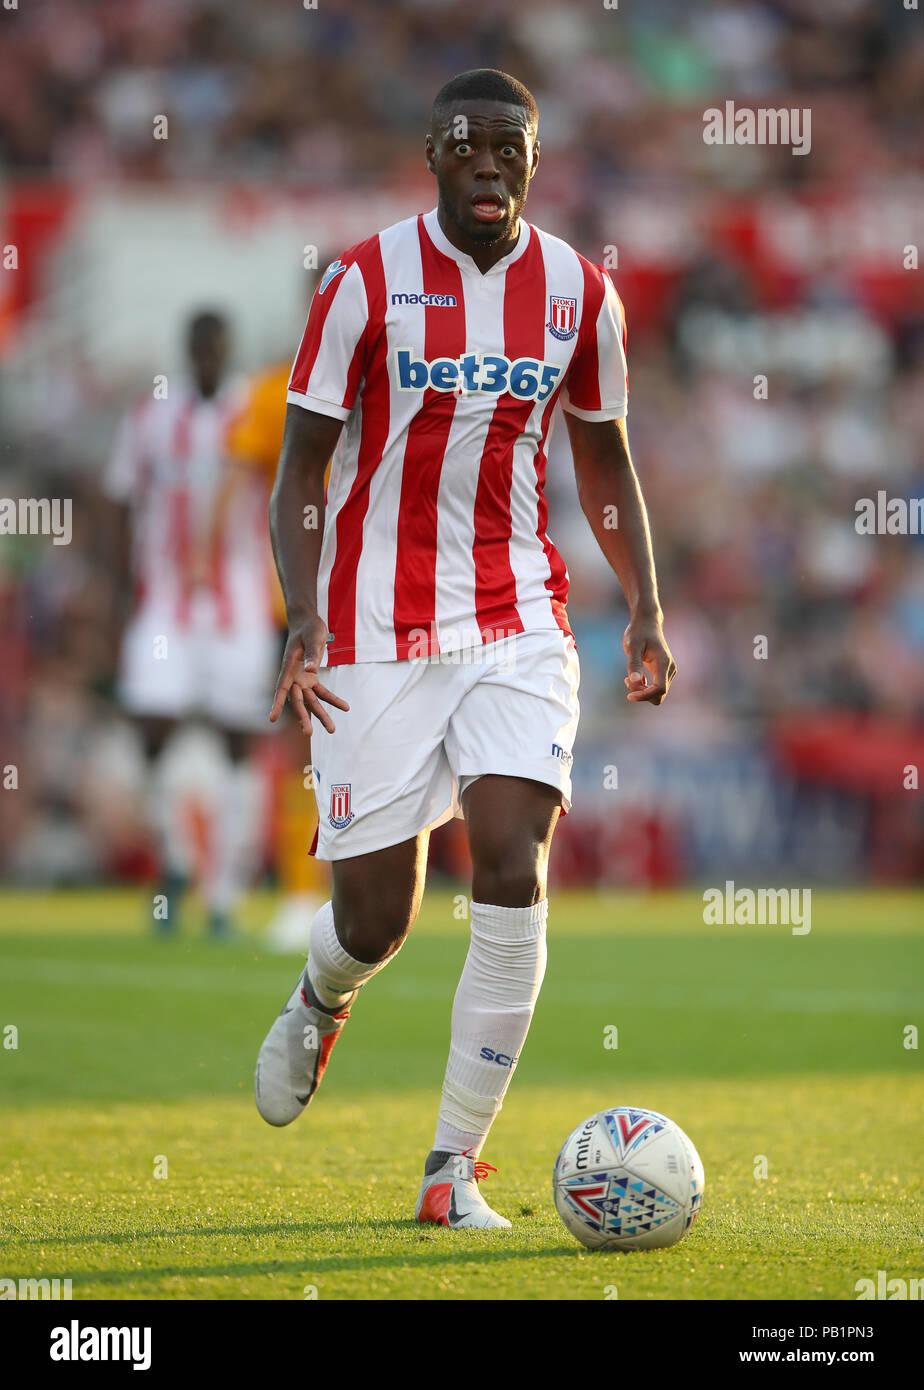 Stoke City's Bruno Martins Indl during a pre season friendly match at The Bet365 Stadium, Stoke. PRESS ASSOCIATION Photo. Picture date: Wednesday July 25, 2018. Photo credit should read: Nick Potts/PA Wire. EDITORIAL USE ONLY No use with unauthorised audio, video, data, fixture lists, club/league logos or 'live' services. Online in-match use limited to 75 images, no video emulation. No use in betting, games or single club/league/player publications. Stock Photo